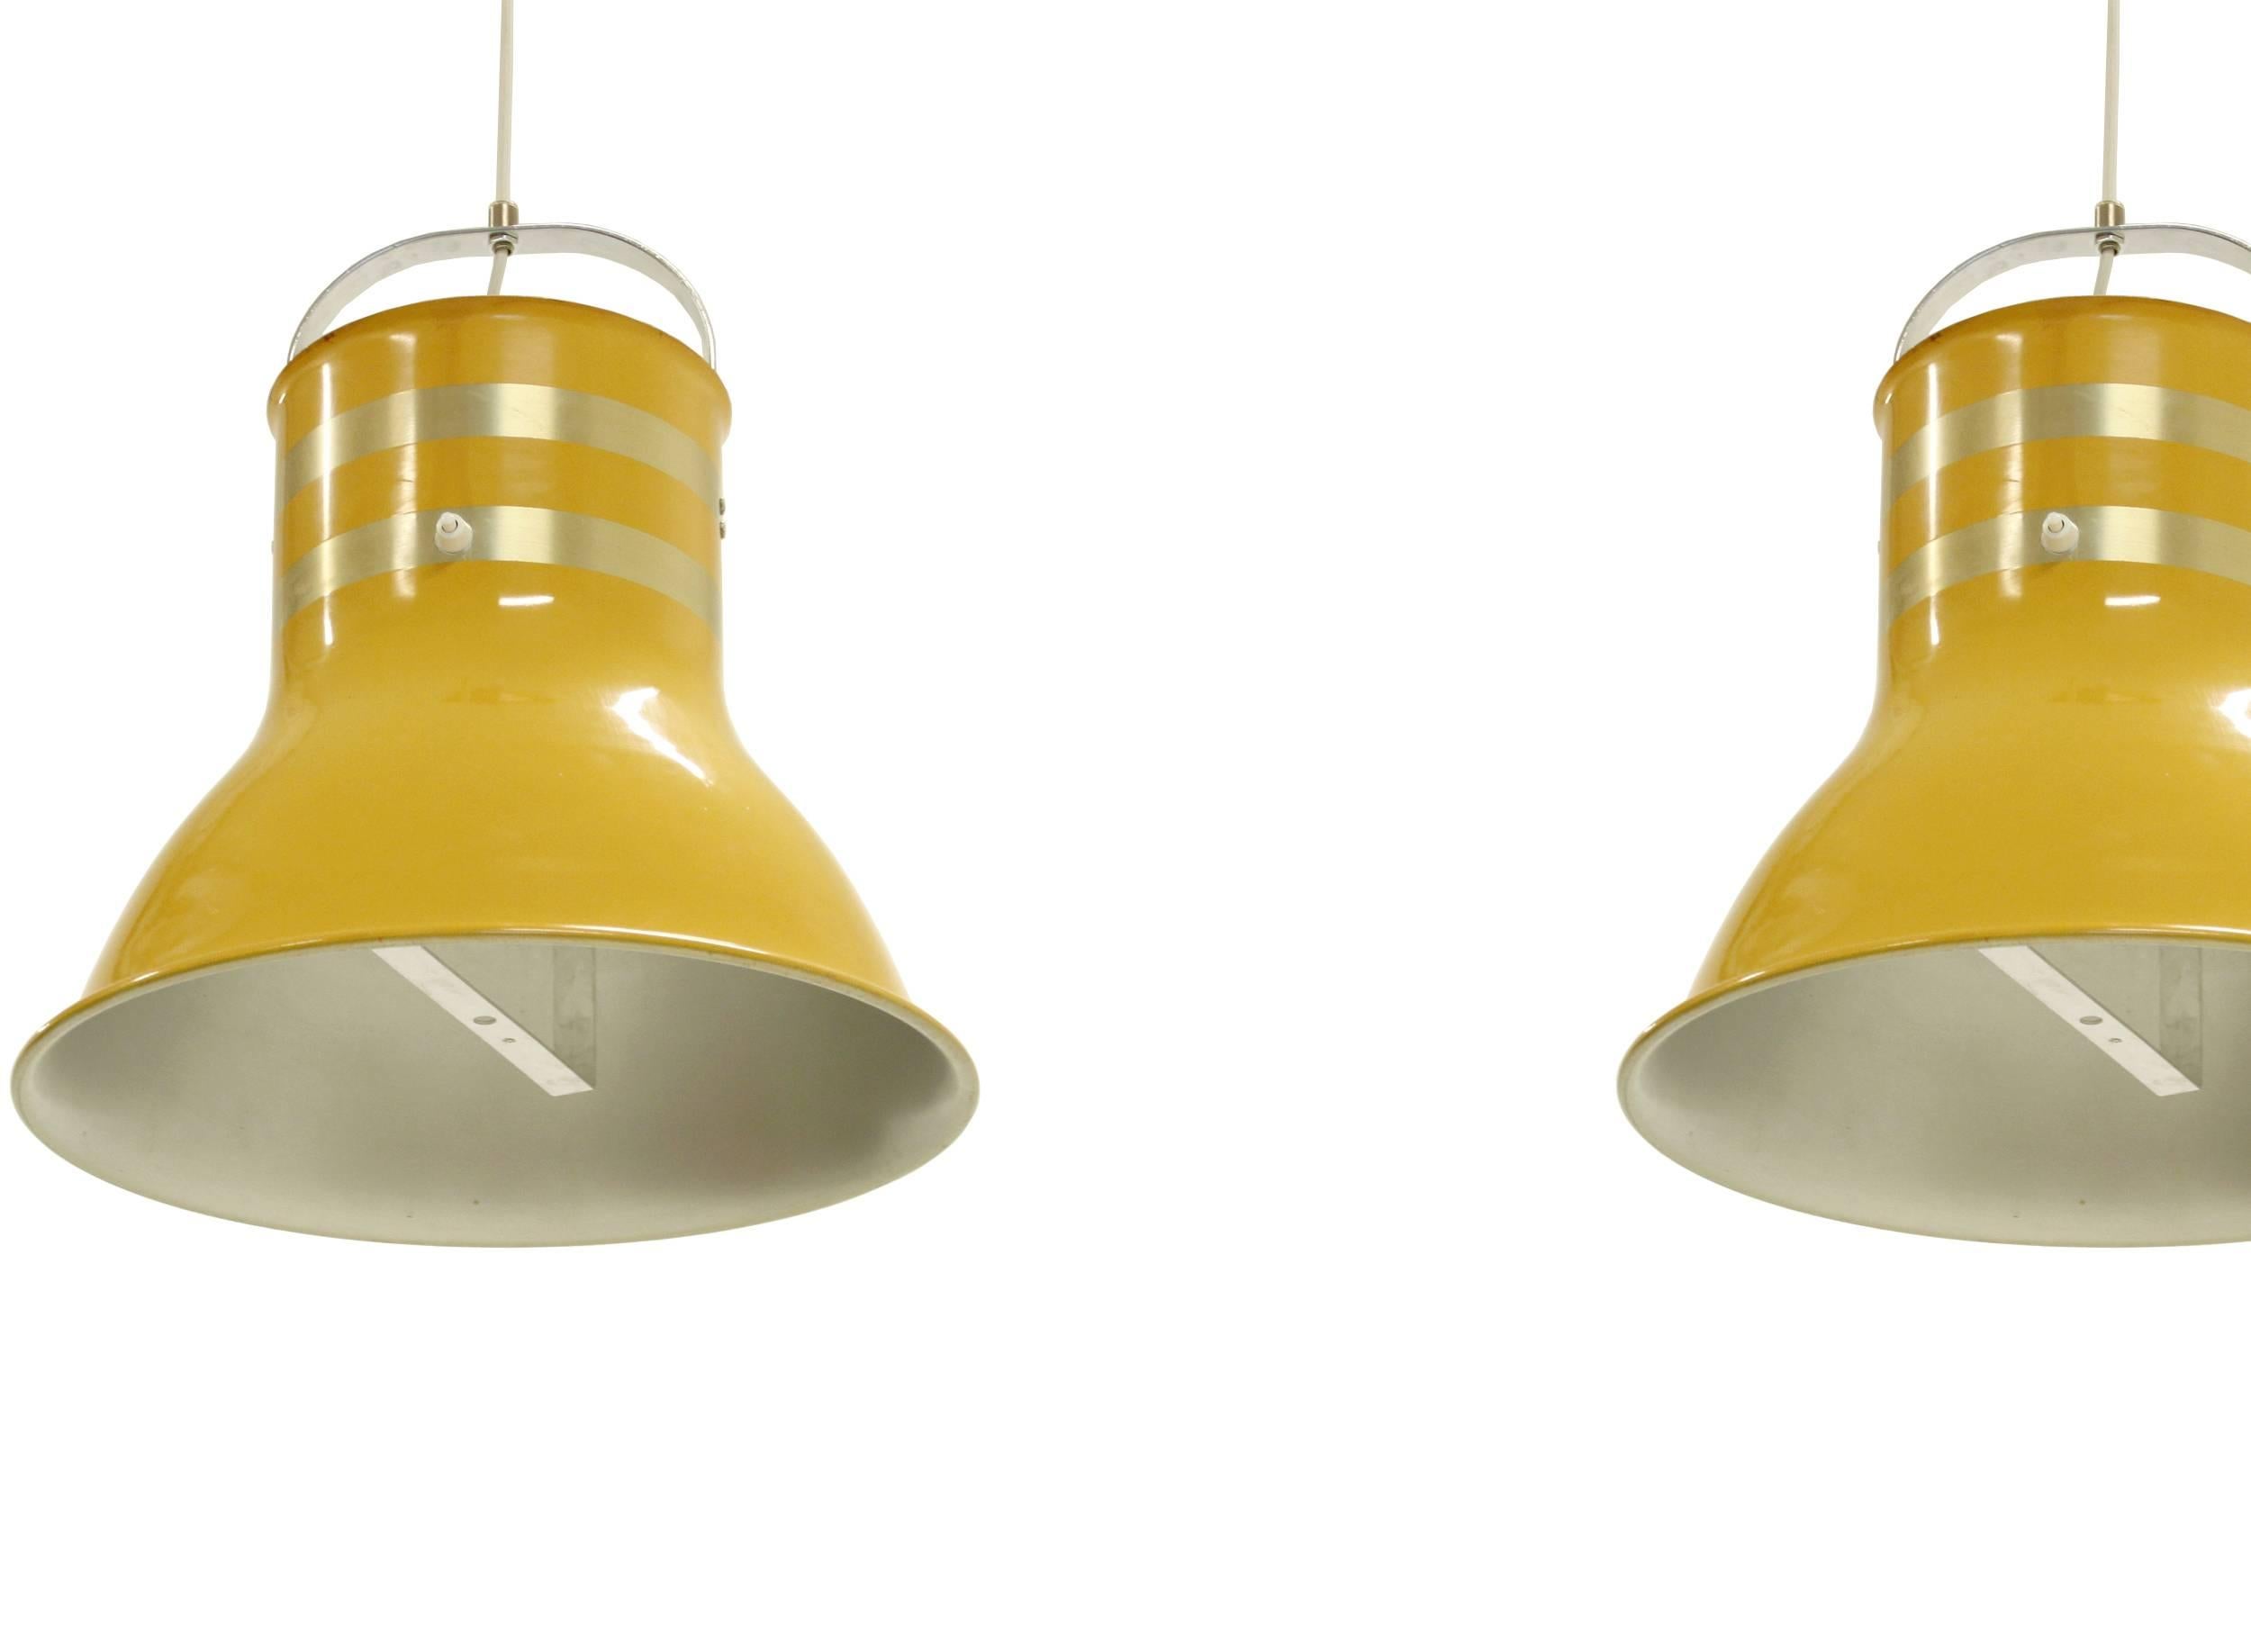 Refreshing pair of ceiling lights in painted aluminum. Designed by Per Sundstedt and made in Sweden by Kosta AB from circa 1970s first half. Both lamps have been rewired and are fully working. Both lamps use 60W, E27 bulbs.